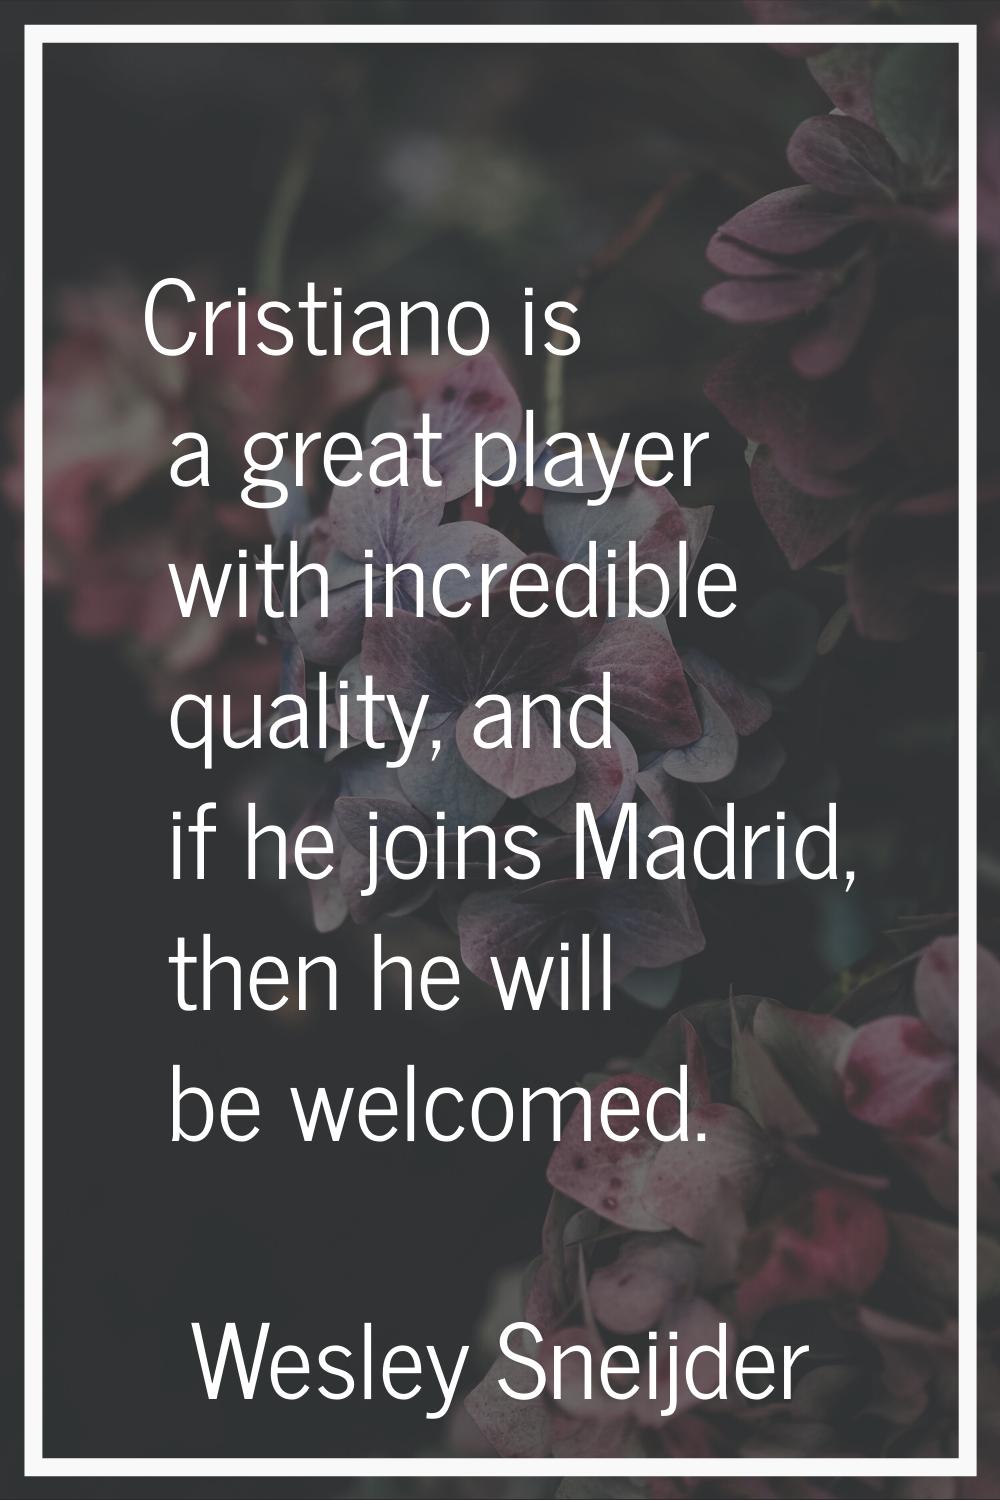 Cristiano is a great player with incredible quality, and if he joins Madrid, then he will be welcom